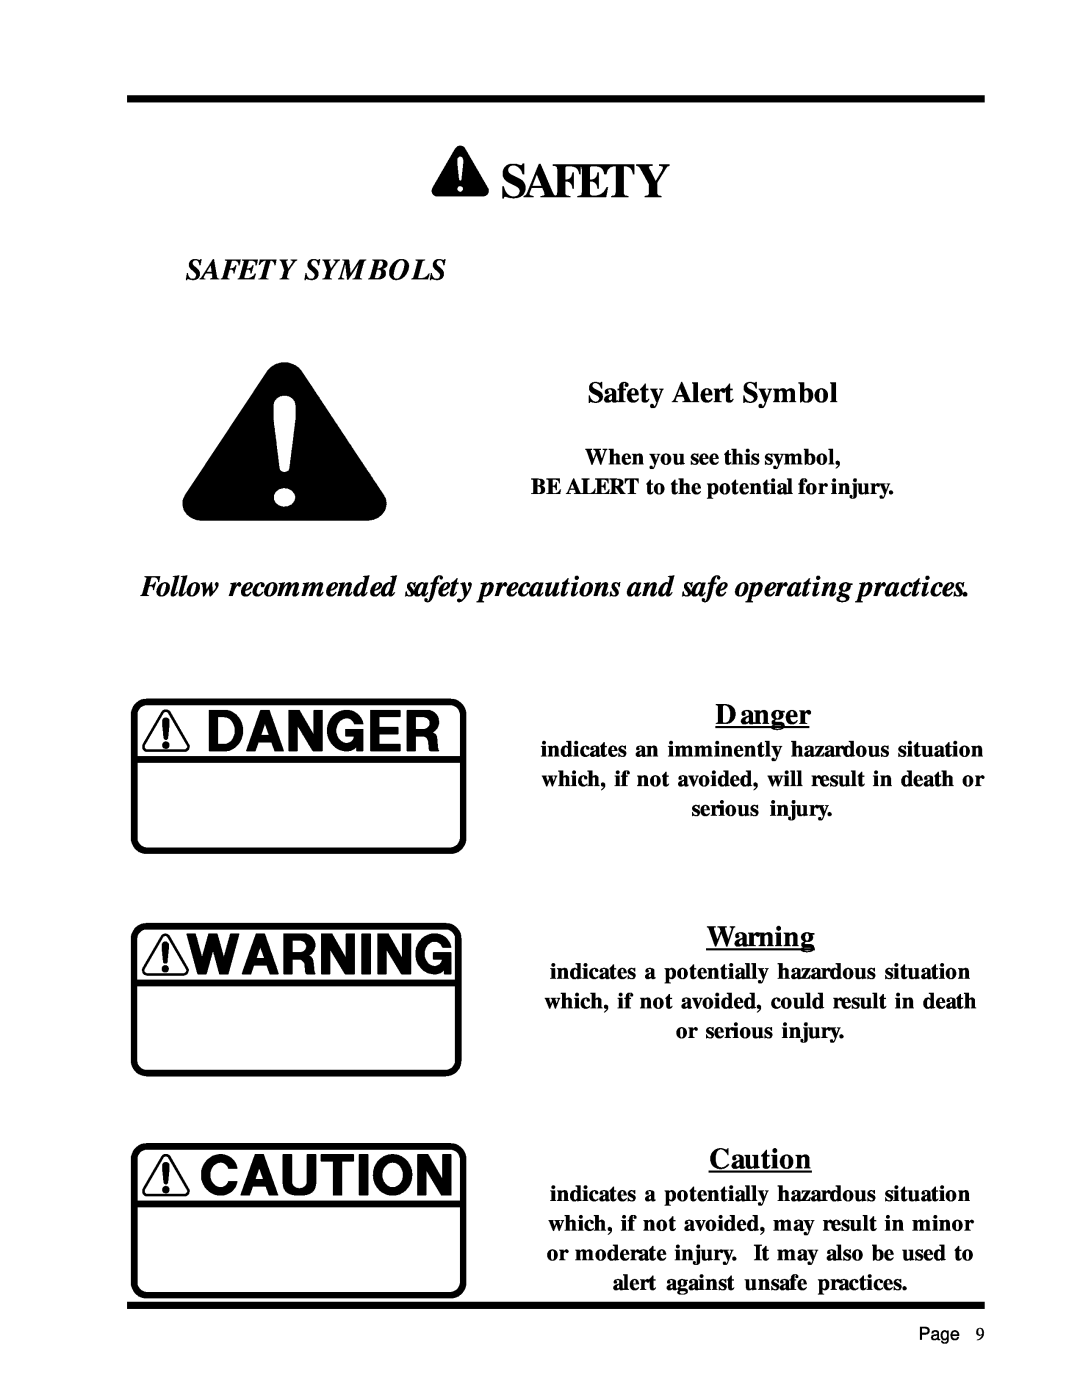 Dixon ZTR 2301 Safety Symbols, Safety Alert Symbol, Follow recommended safety precautions and safe operating practices 